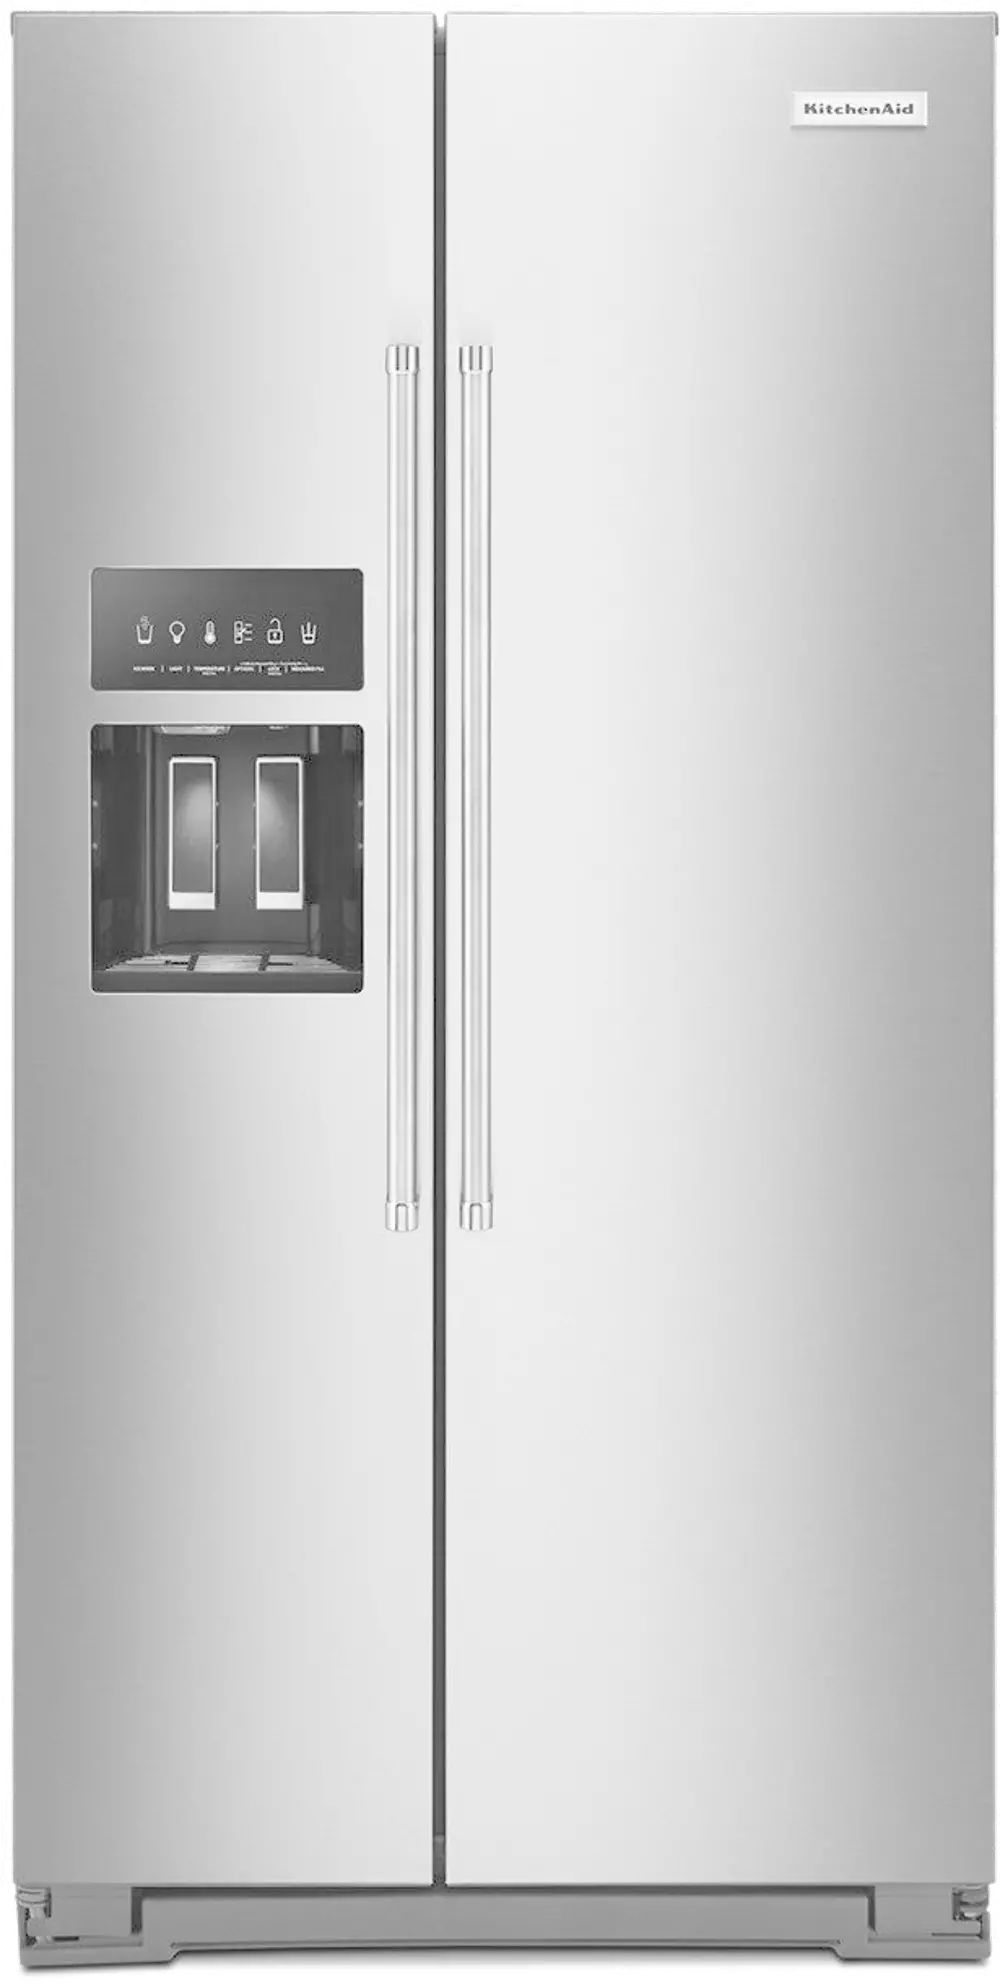 KRSC703HPS KitchenAid 22.7 cu ft Side by Side Refrigerator - Counter Depth Stainless Steel-1